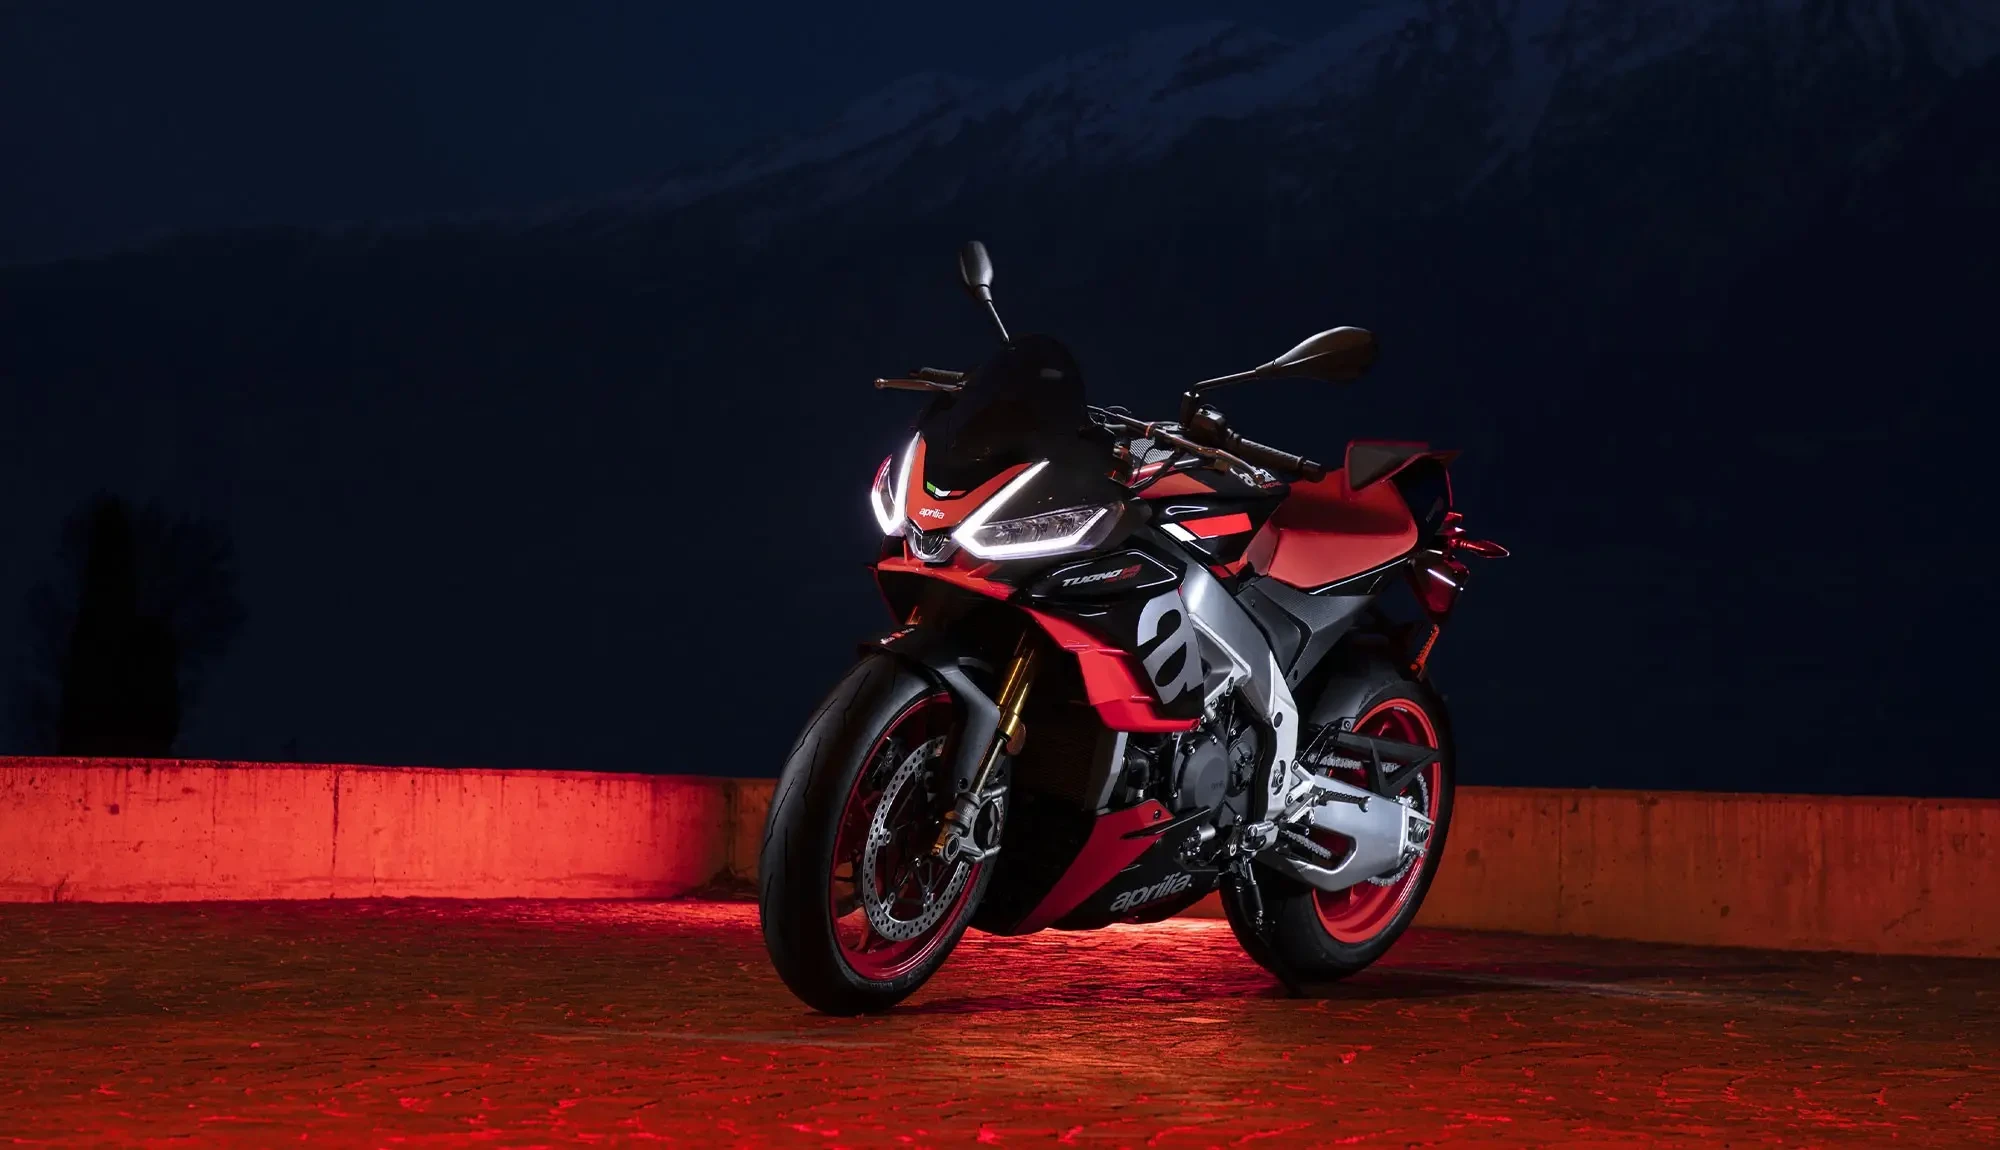 Front three quarter image of Aprilia Tuono Factory taken at night with red neon back light